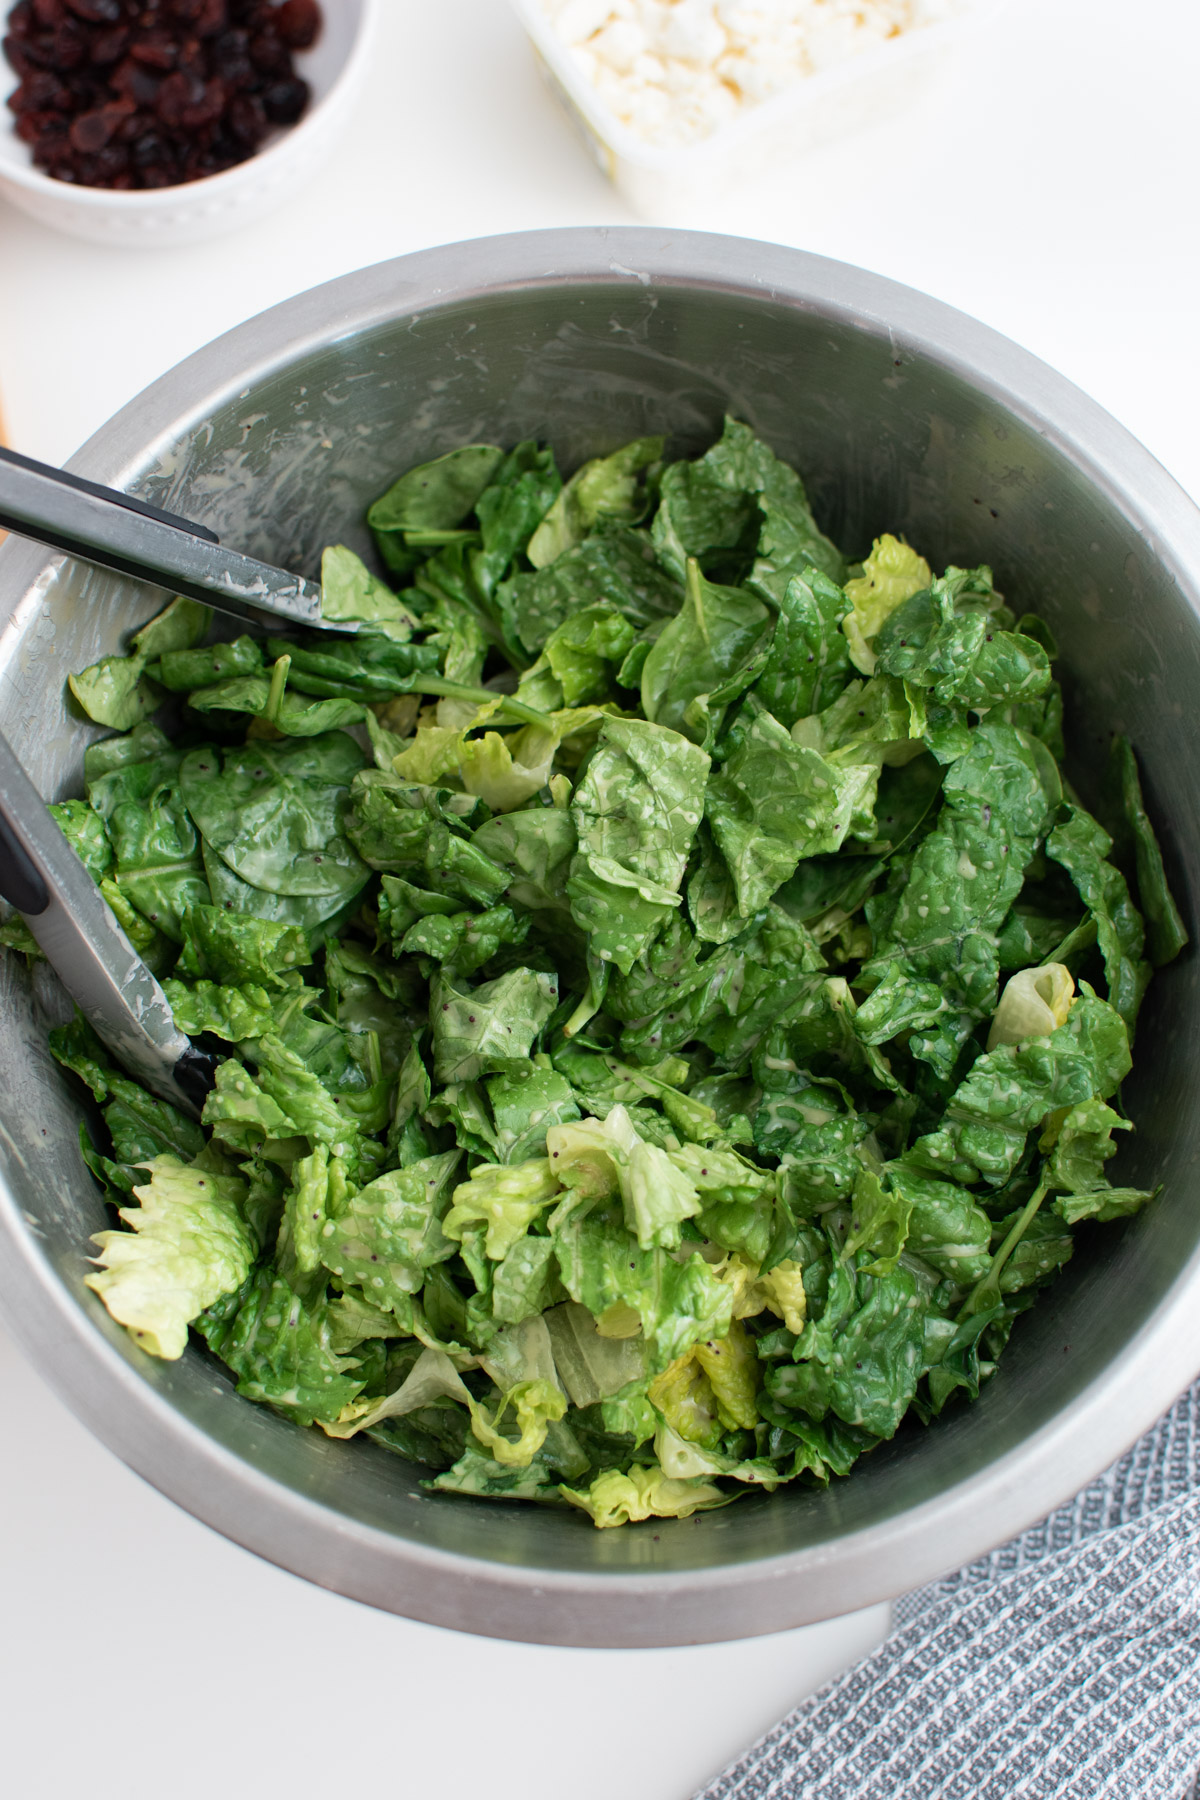 Lettuce and spinach covered in dressing in a large metal mixing bowl.